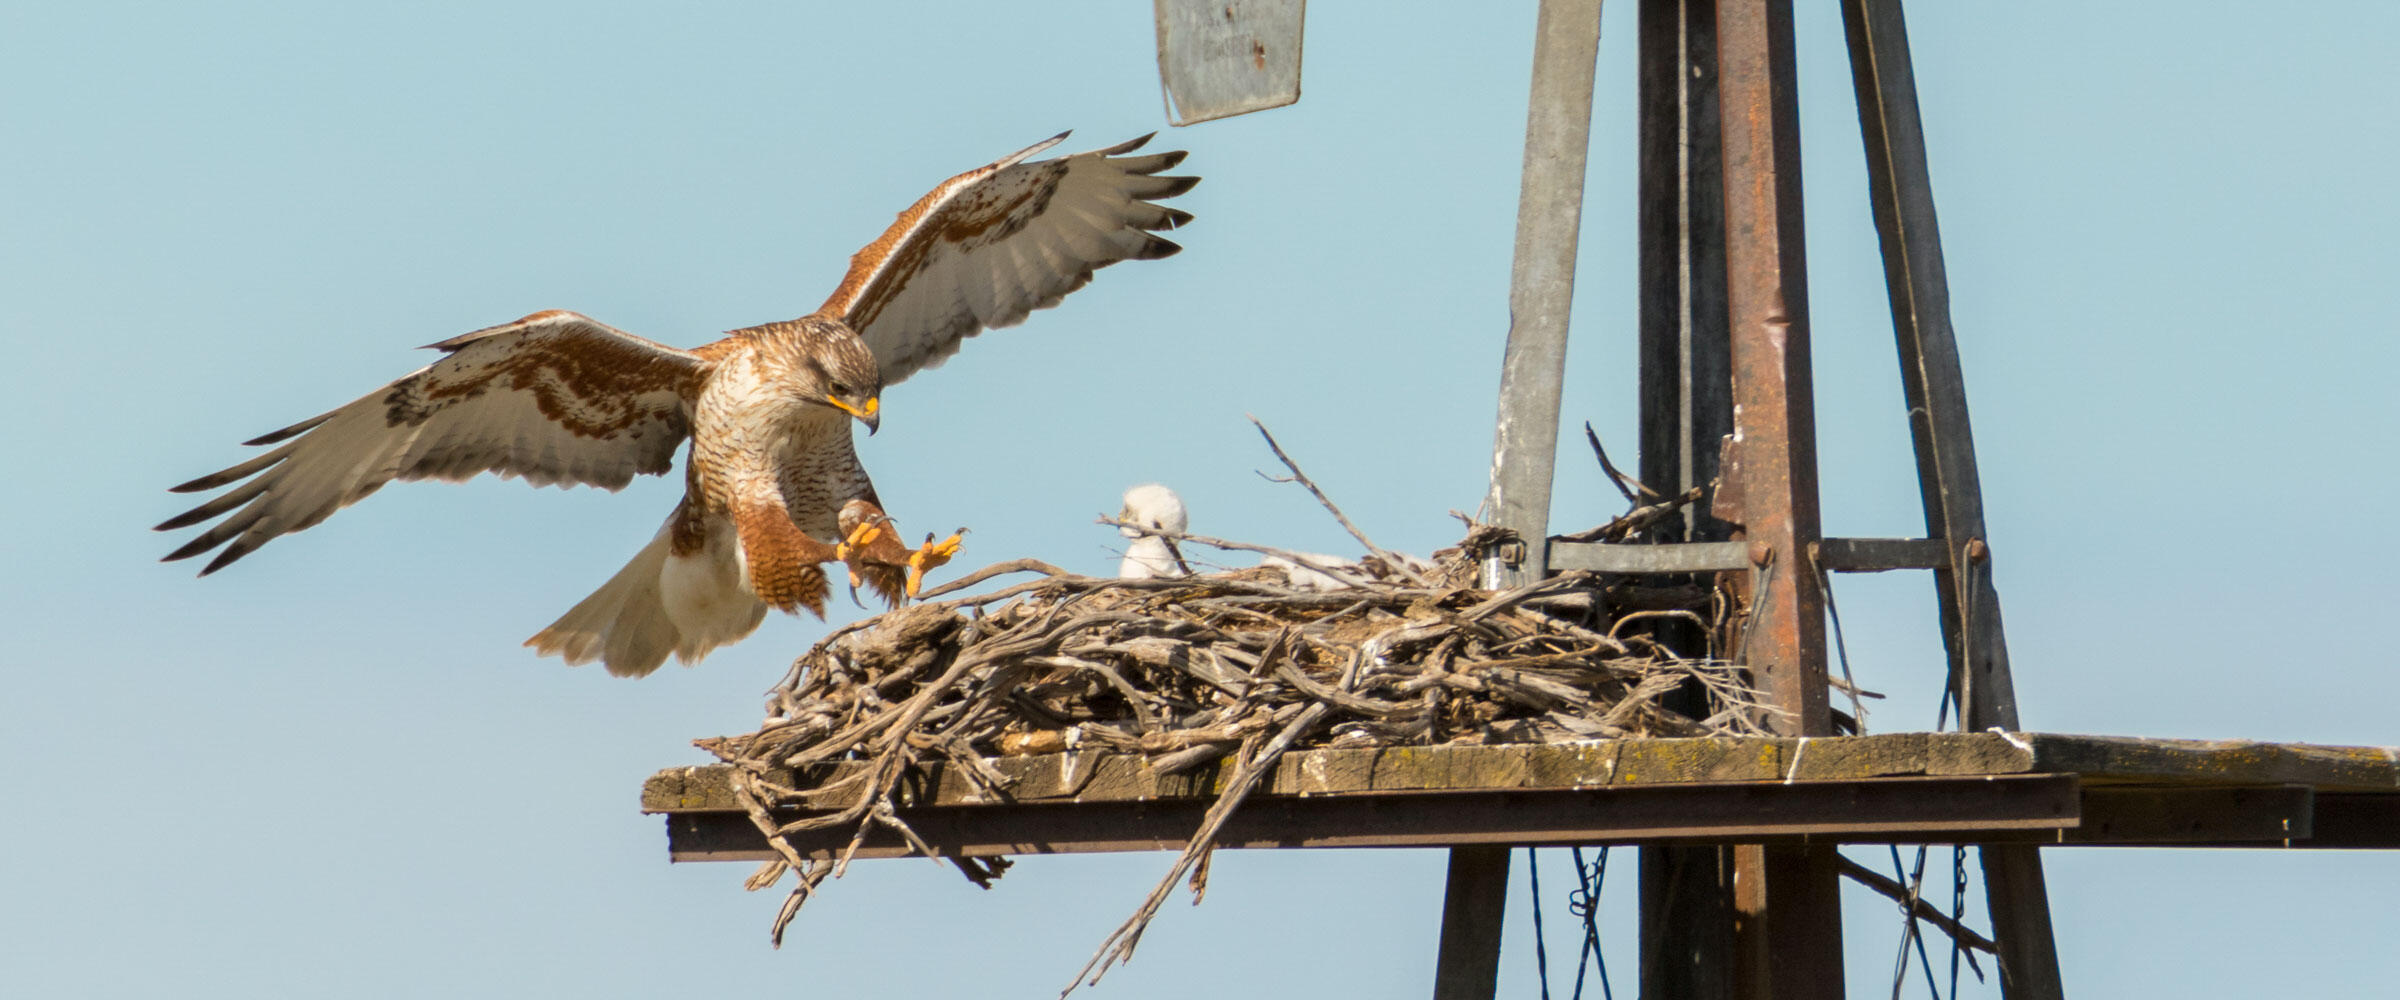 A Ferruginous Hawk lands at its nest with a chick in it.